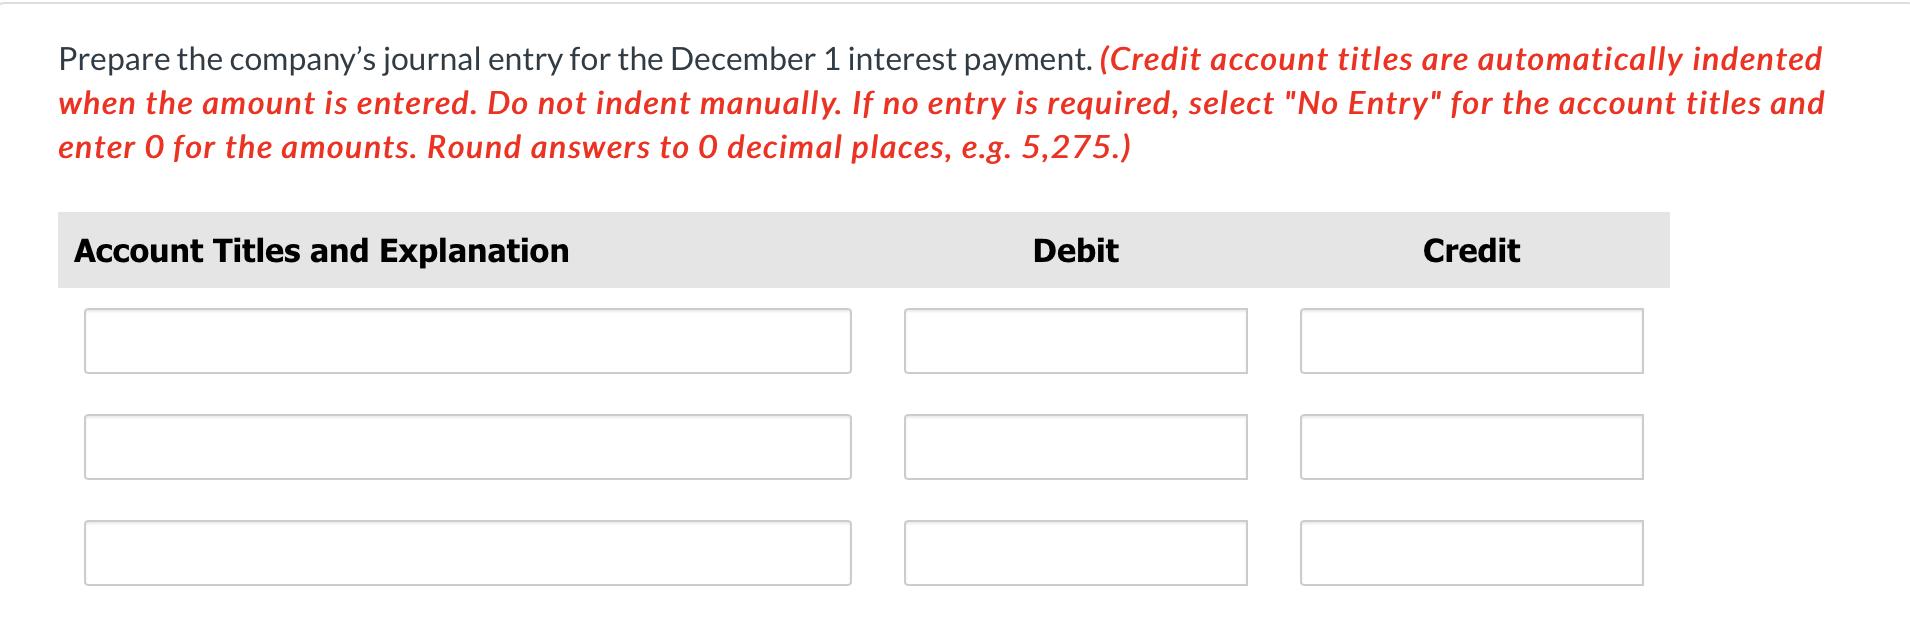 Prepare the companys journal entry for the December 1 interest payment. (Credit account titles are automatically indentedwh